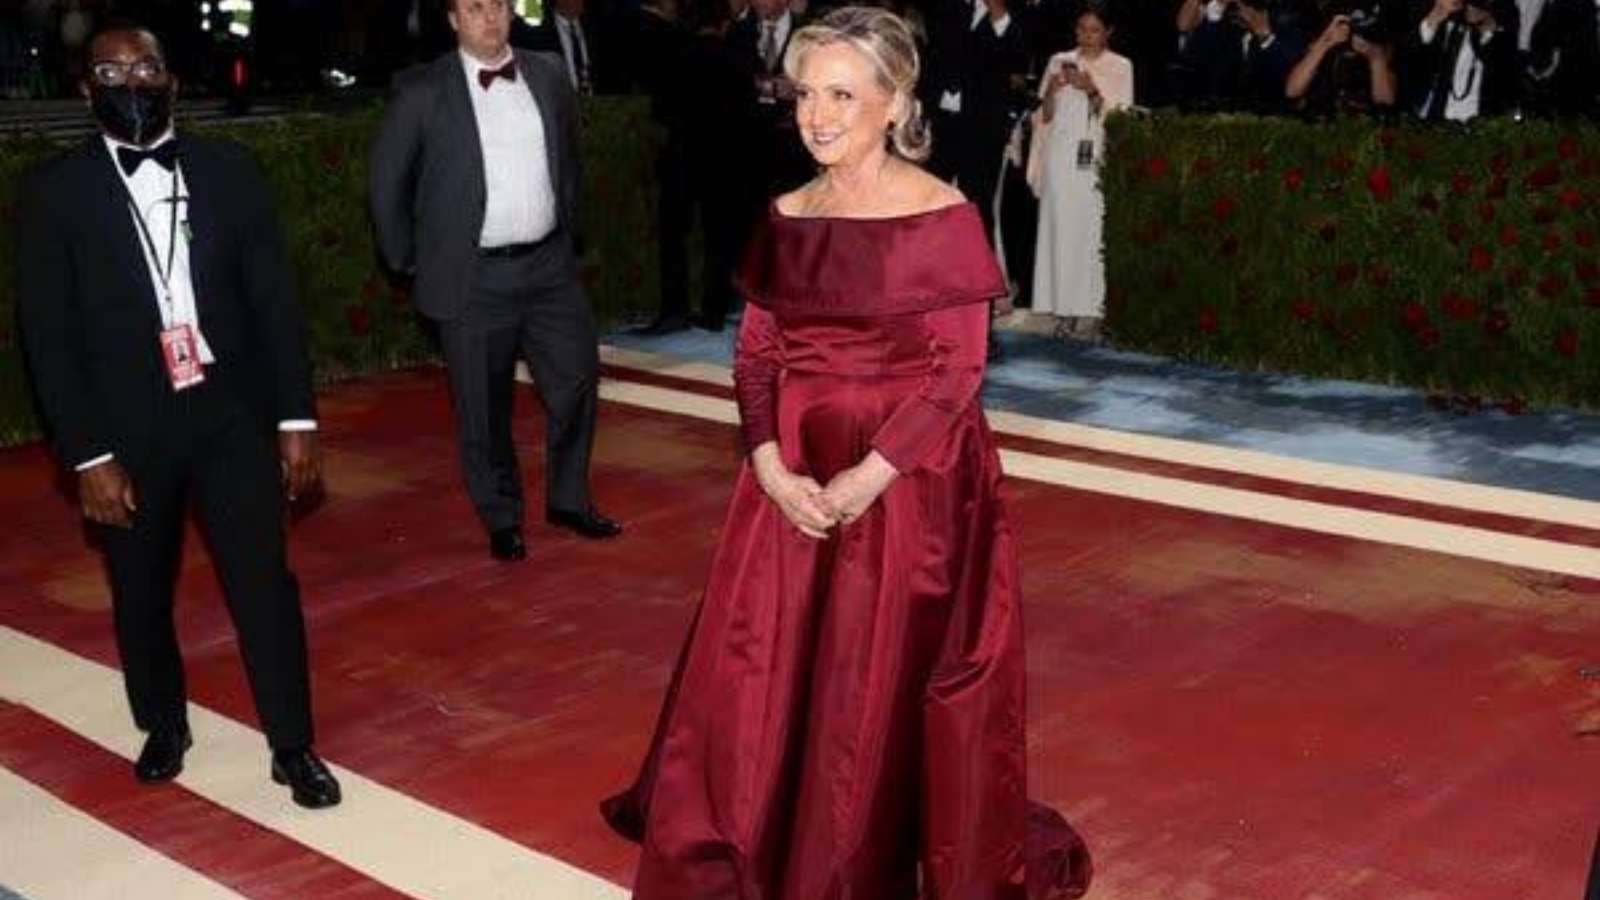 Ex-secretary of the State Hillary Clinton at the Met Gala Red Carpet 2022